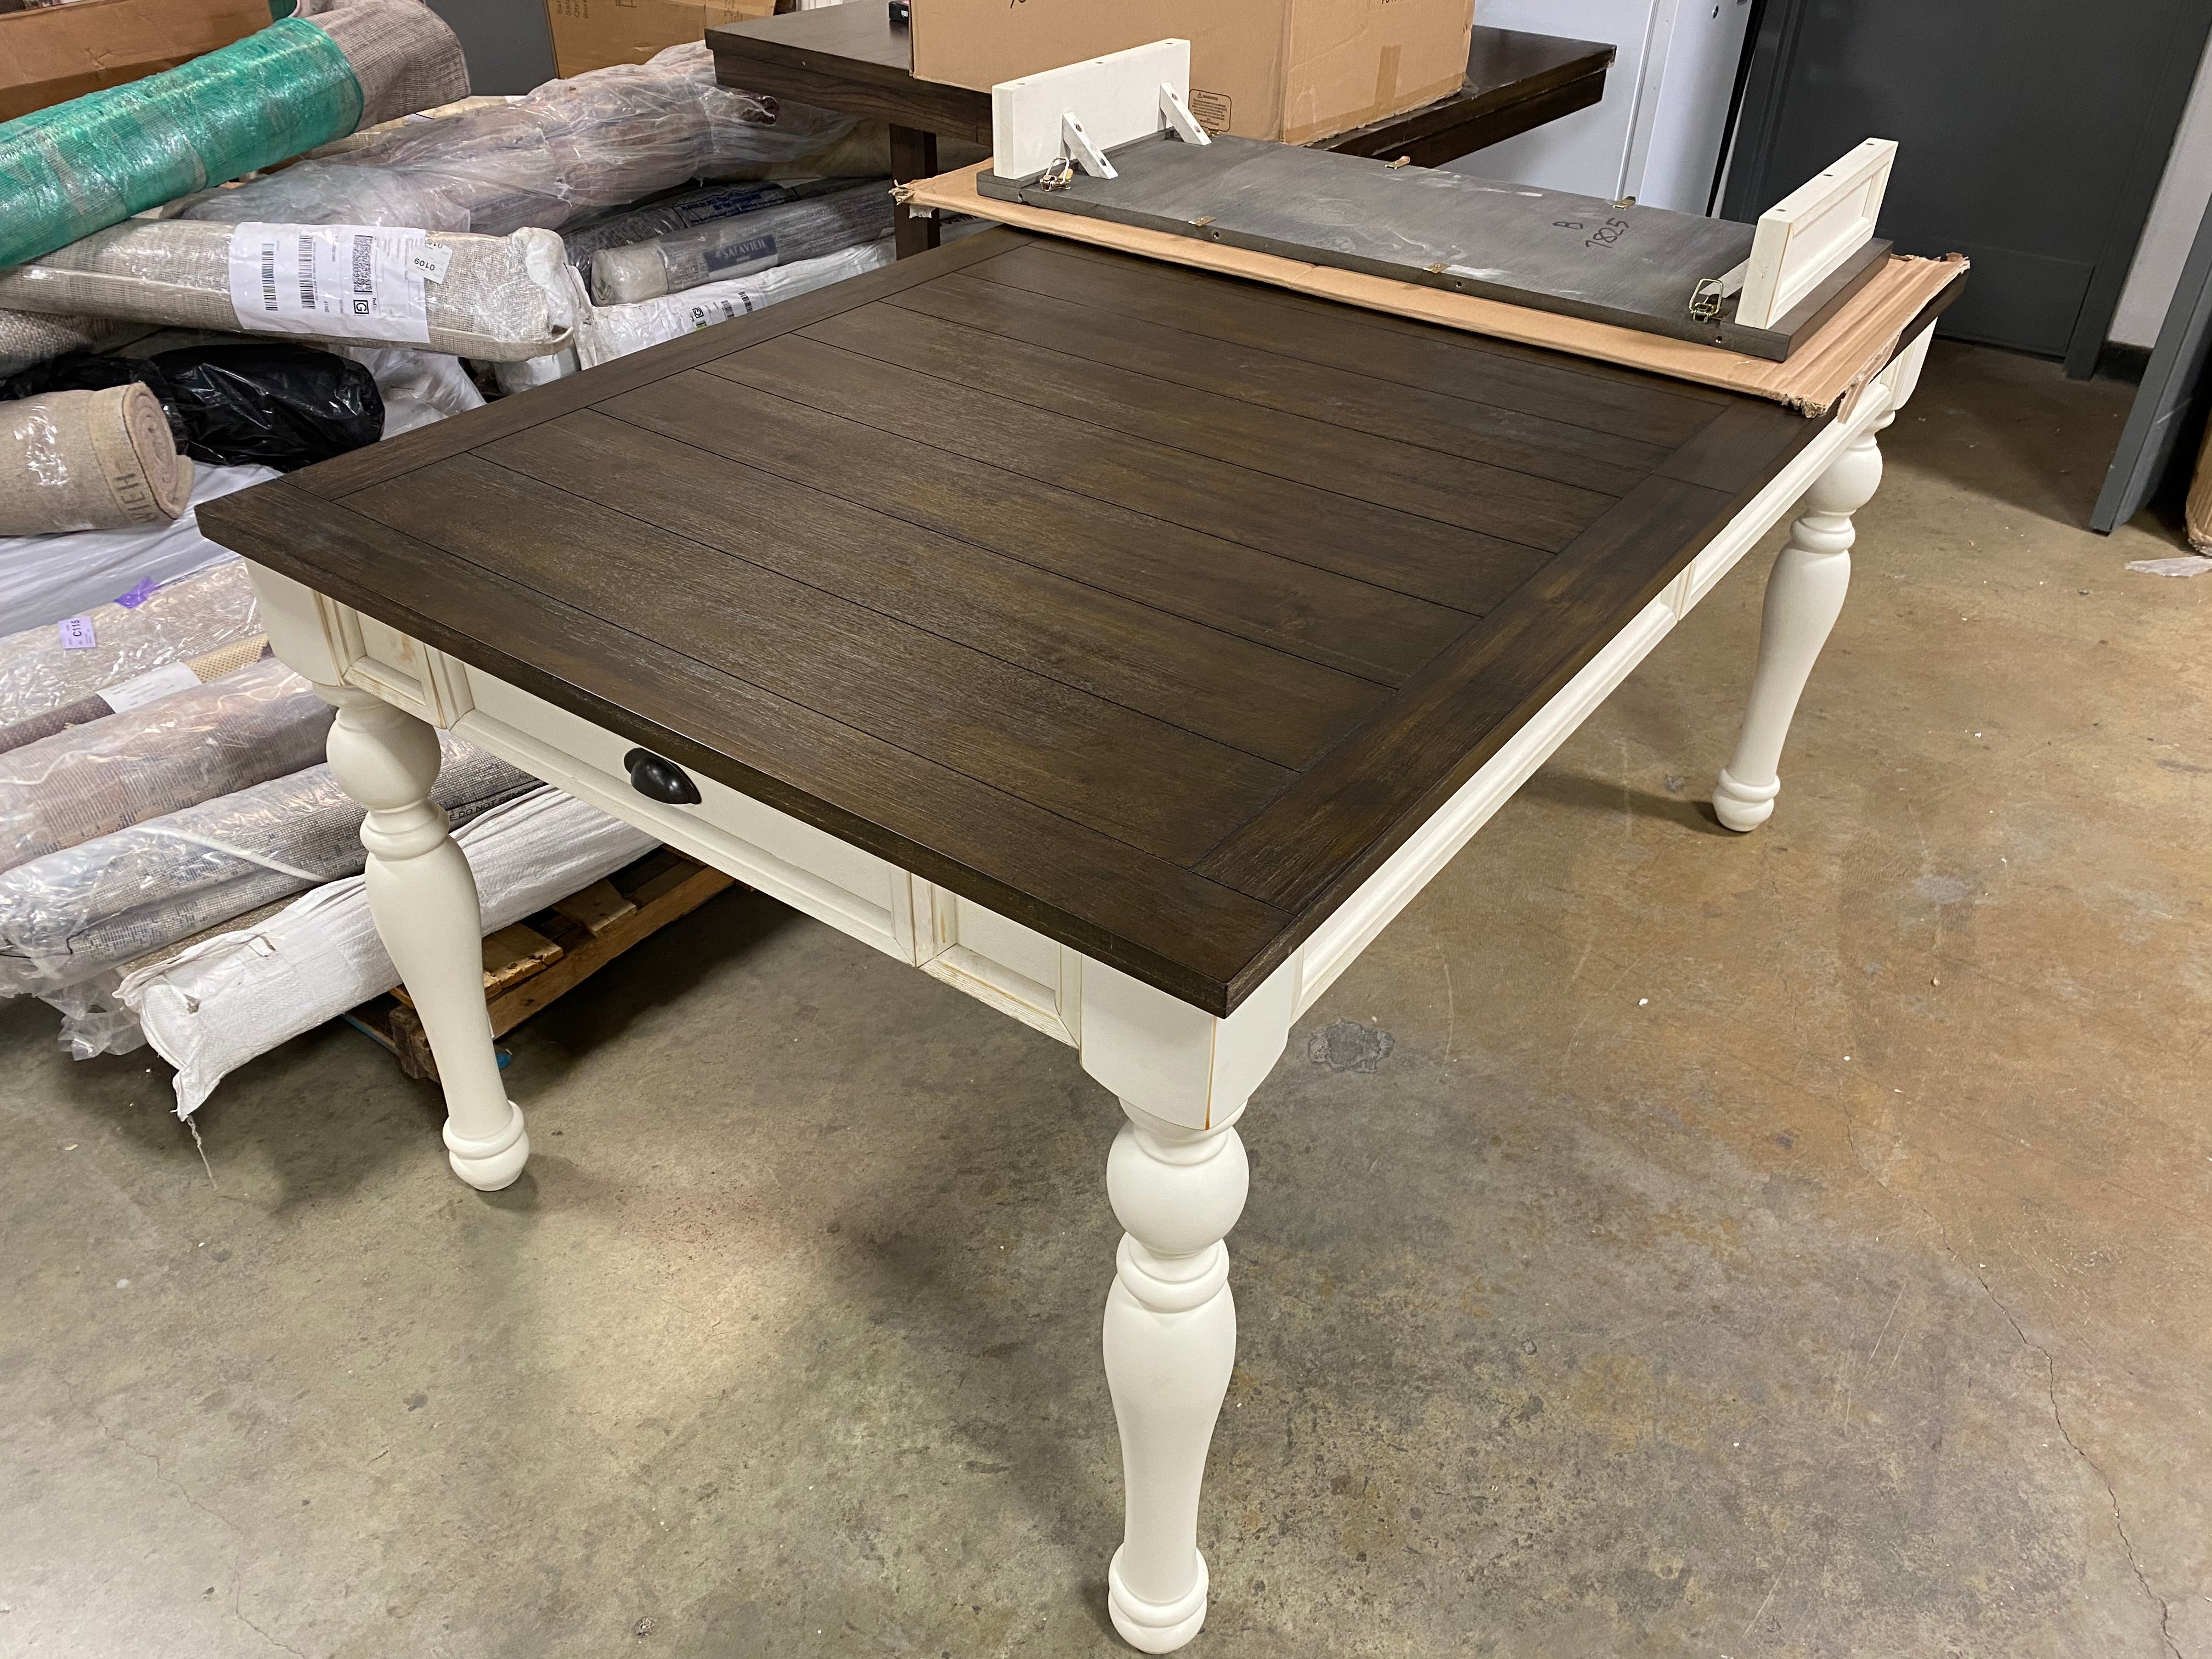 Joanna Two Tone Dining Table with Leaf